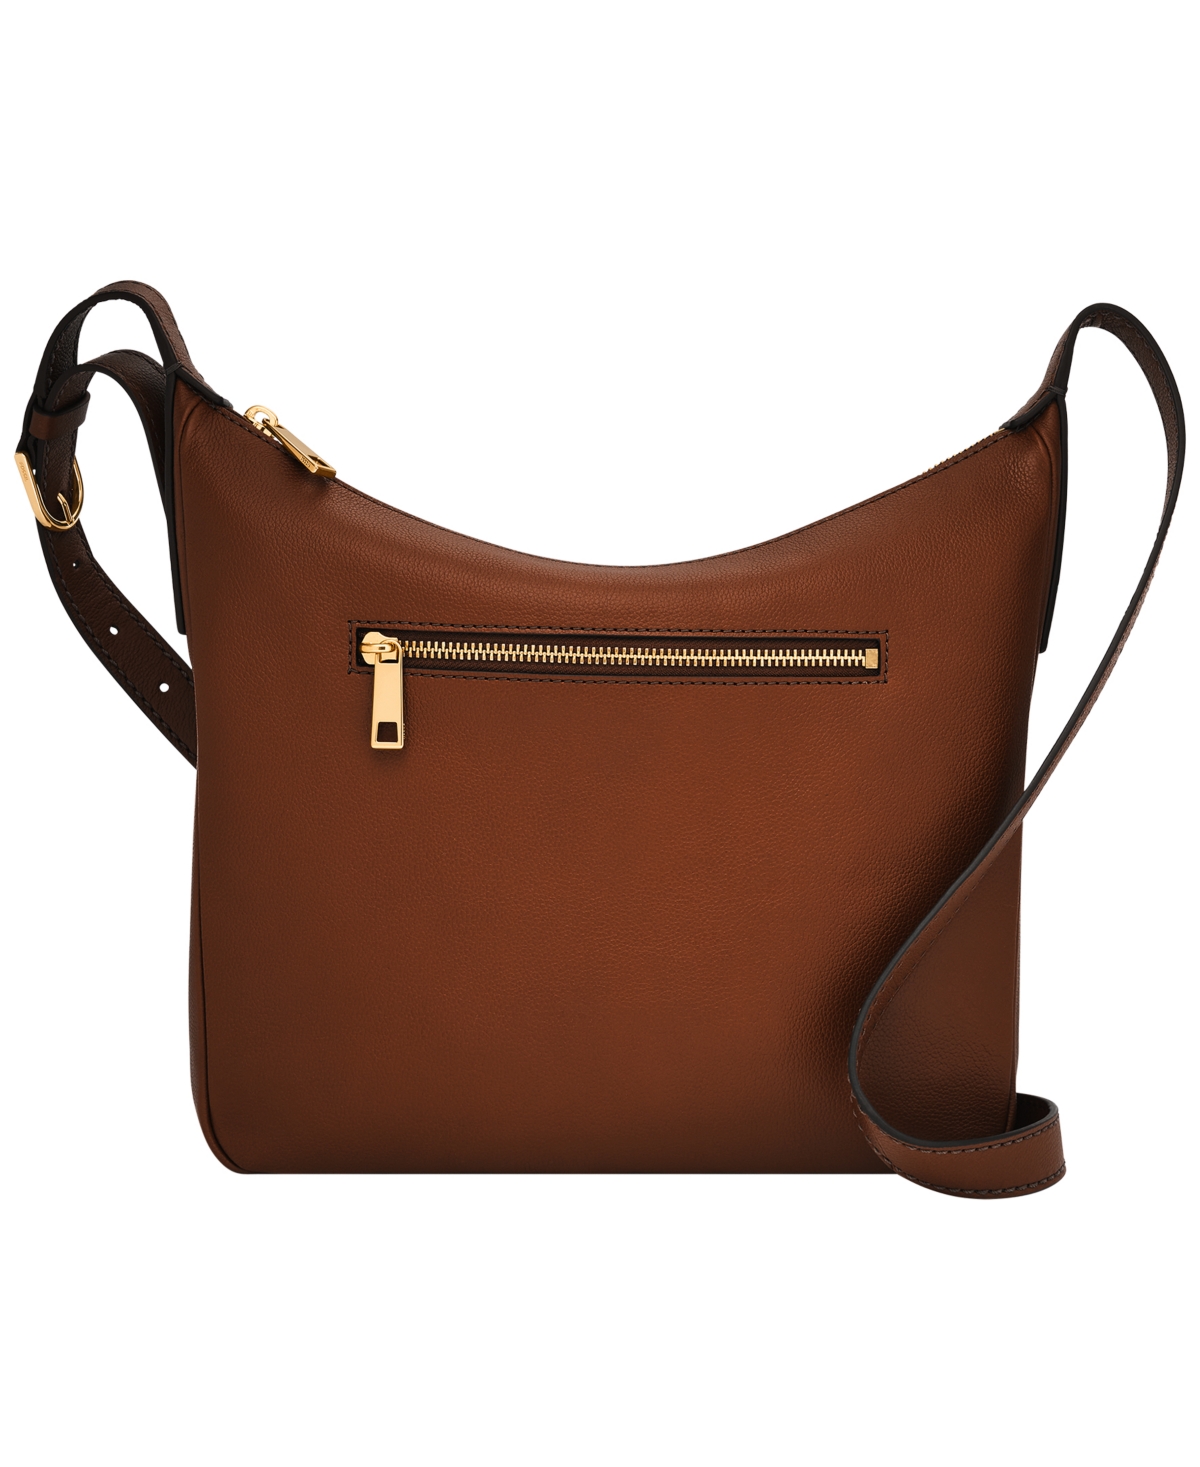 FOSSIL CECILIA LEATHER TOP ZIP CROSSBODY BAG